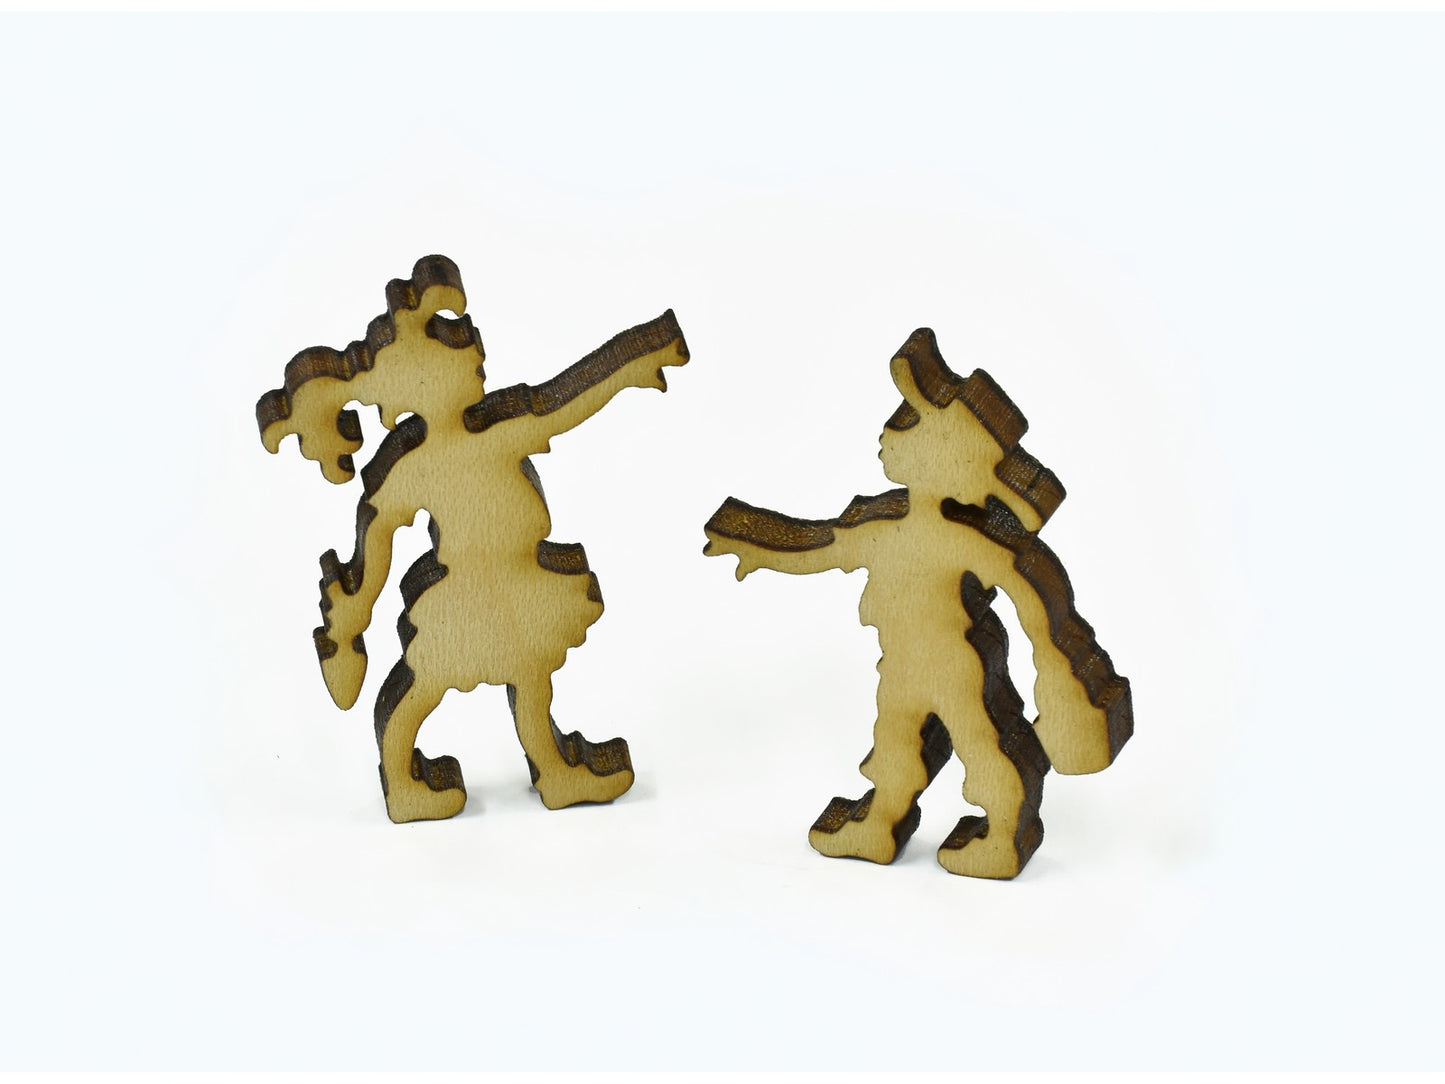 A closeup of pieces in the shape of two children.